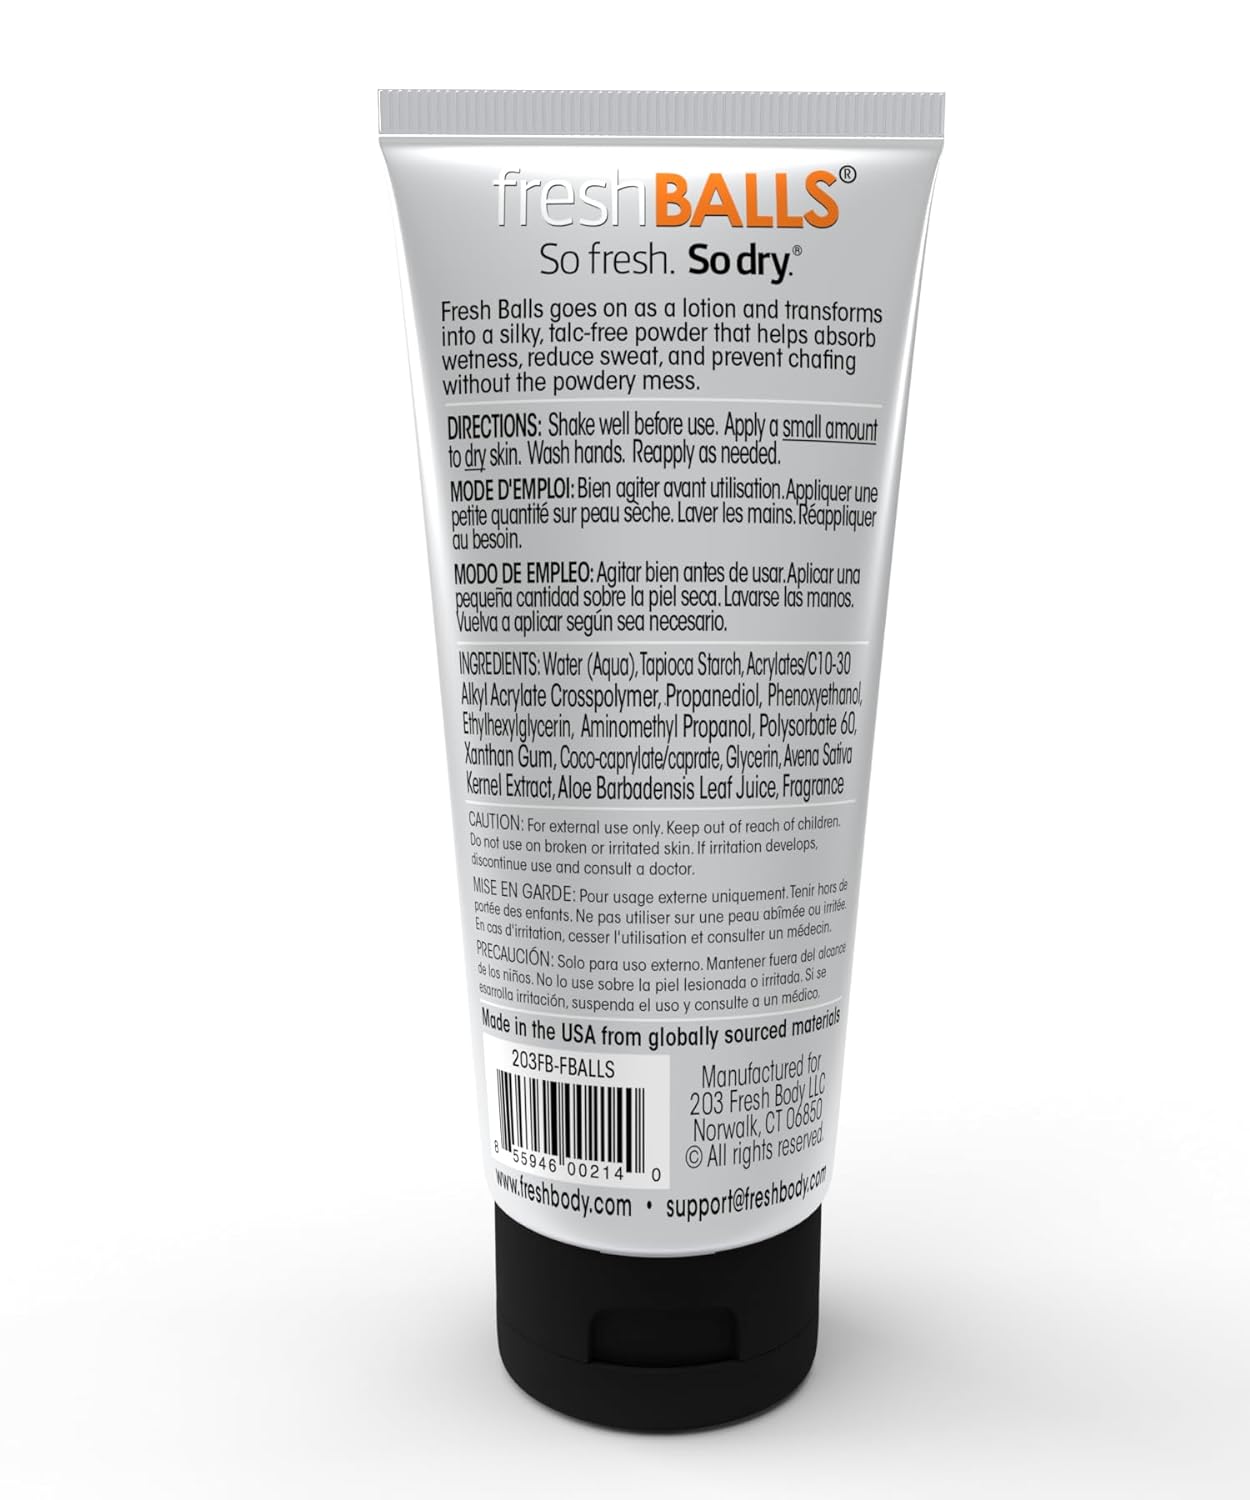 Fresh BALLS Lotion (2 Pack) Anti-Chafing Men's Soothing Cream to Powder Ball Deodorant and Hygiene for Groin Area, 3.4 fl oz : Beauty & Personal Care